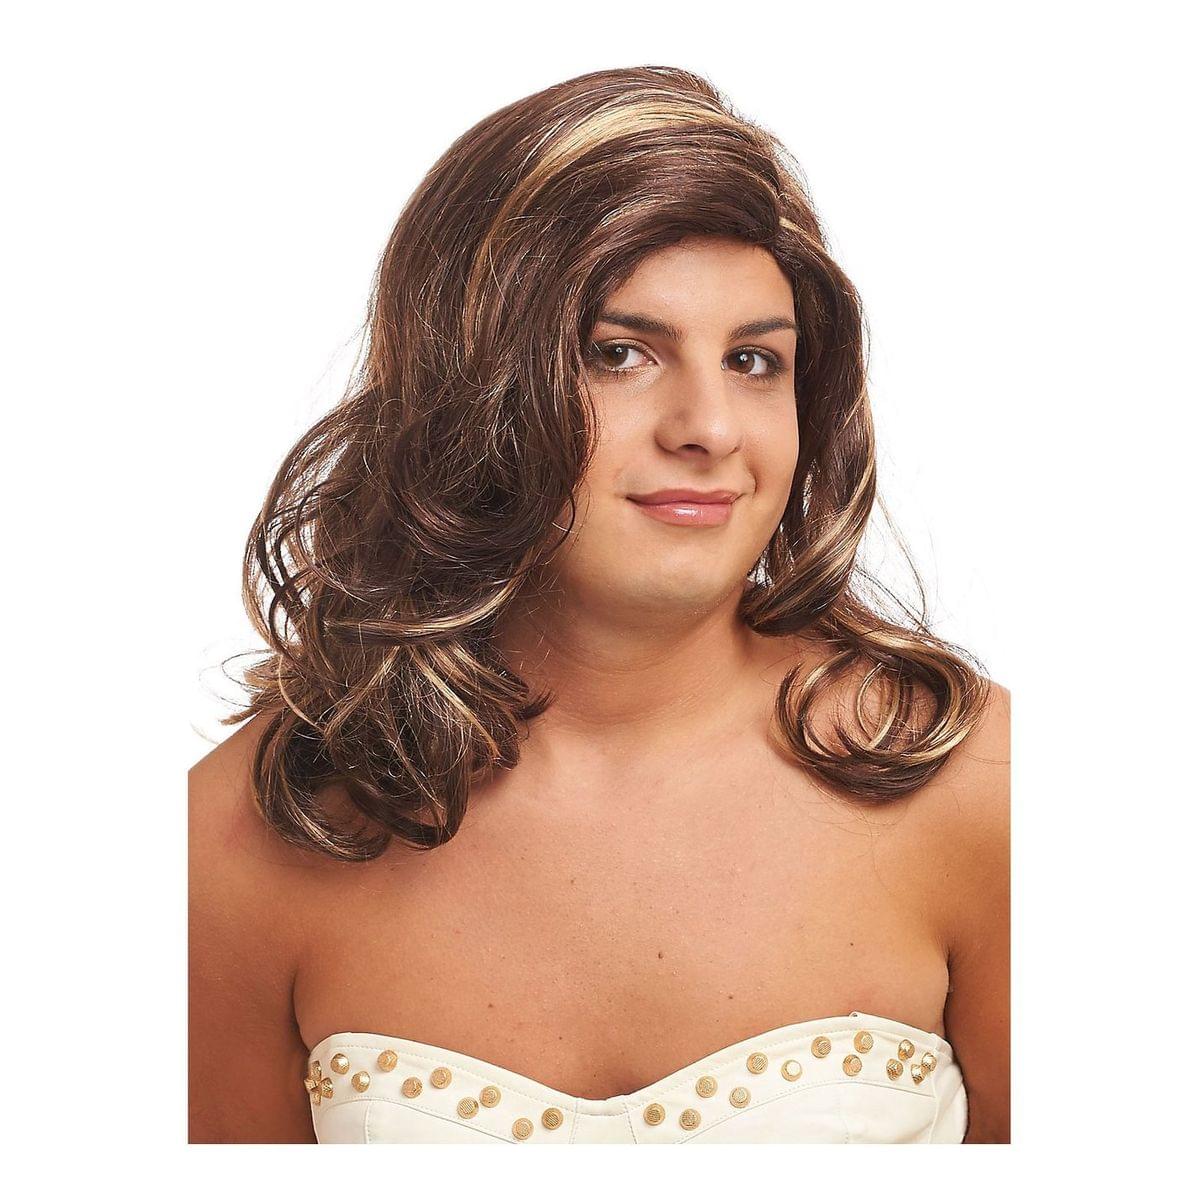 Caitlyn "Decathalon Cait" Adult Costume Wig